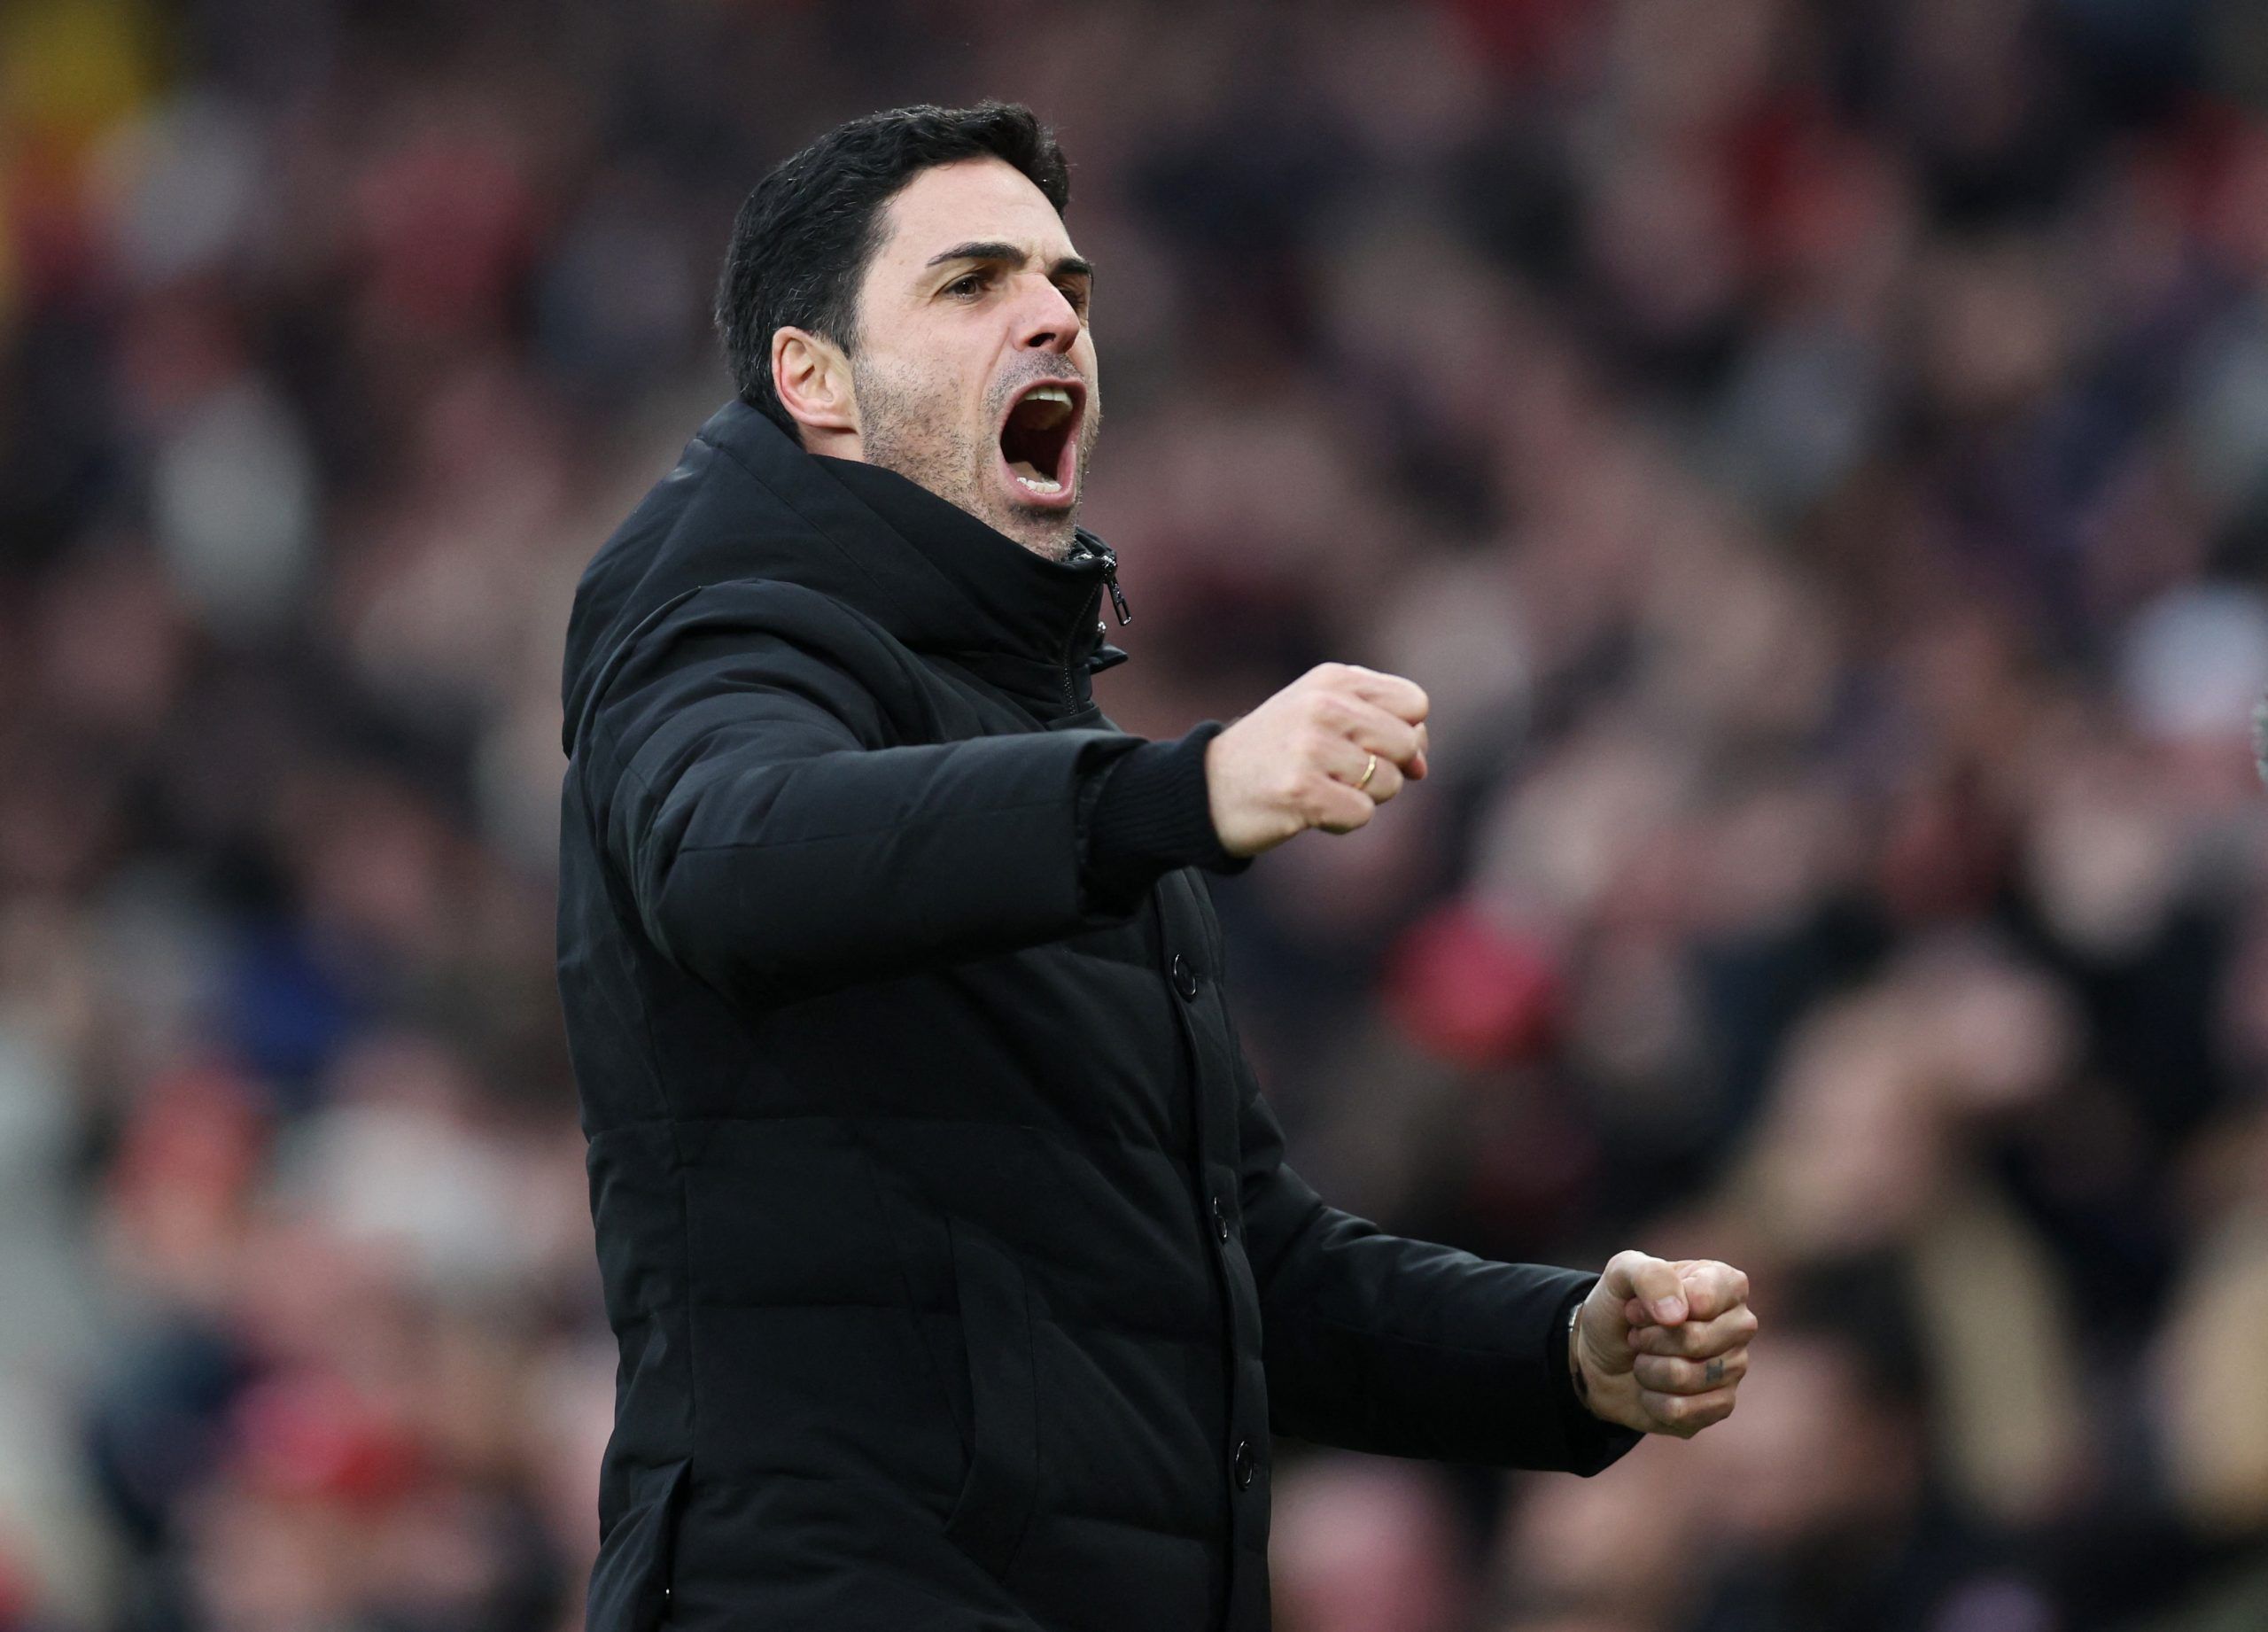 Soccer Football - Premier League - Arsenal v AFC Bournemouth - Emirates Stadium, London, Britain - March 4, 2023 Arsenal manager Mikel Arteta celebrates after the match REUTERS/David Klein EDITORIAL USE ONLY. No use with unauthorized audio, video, data, fixture lists, club/league logos or 'live' services. Online in-match use limited to 75 images, no video emulation. No use in betting, games or single club /league/player publications.  Please contact your account representative for further detail